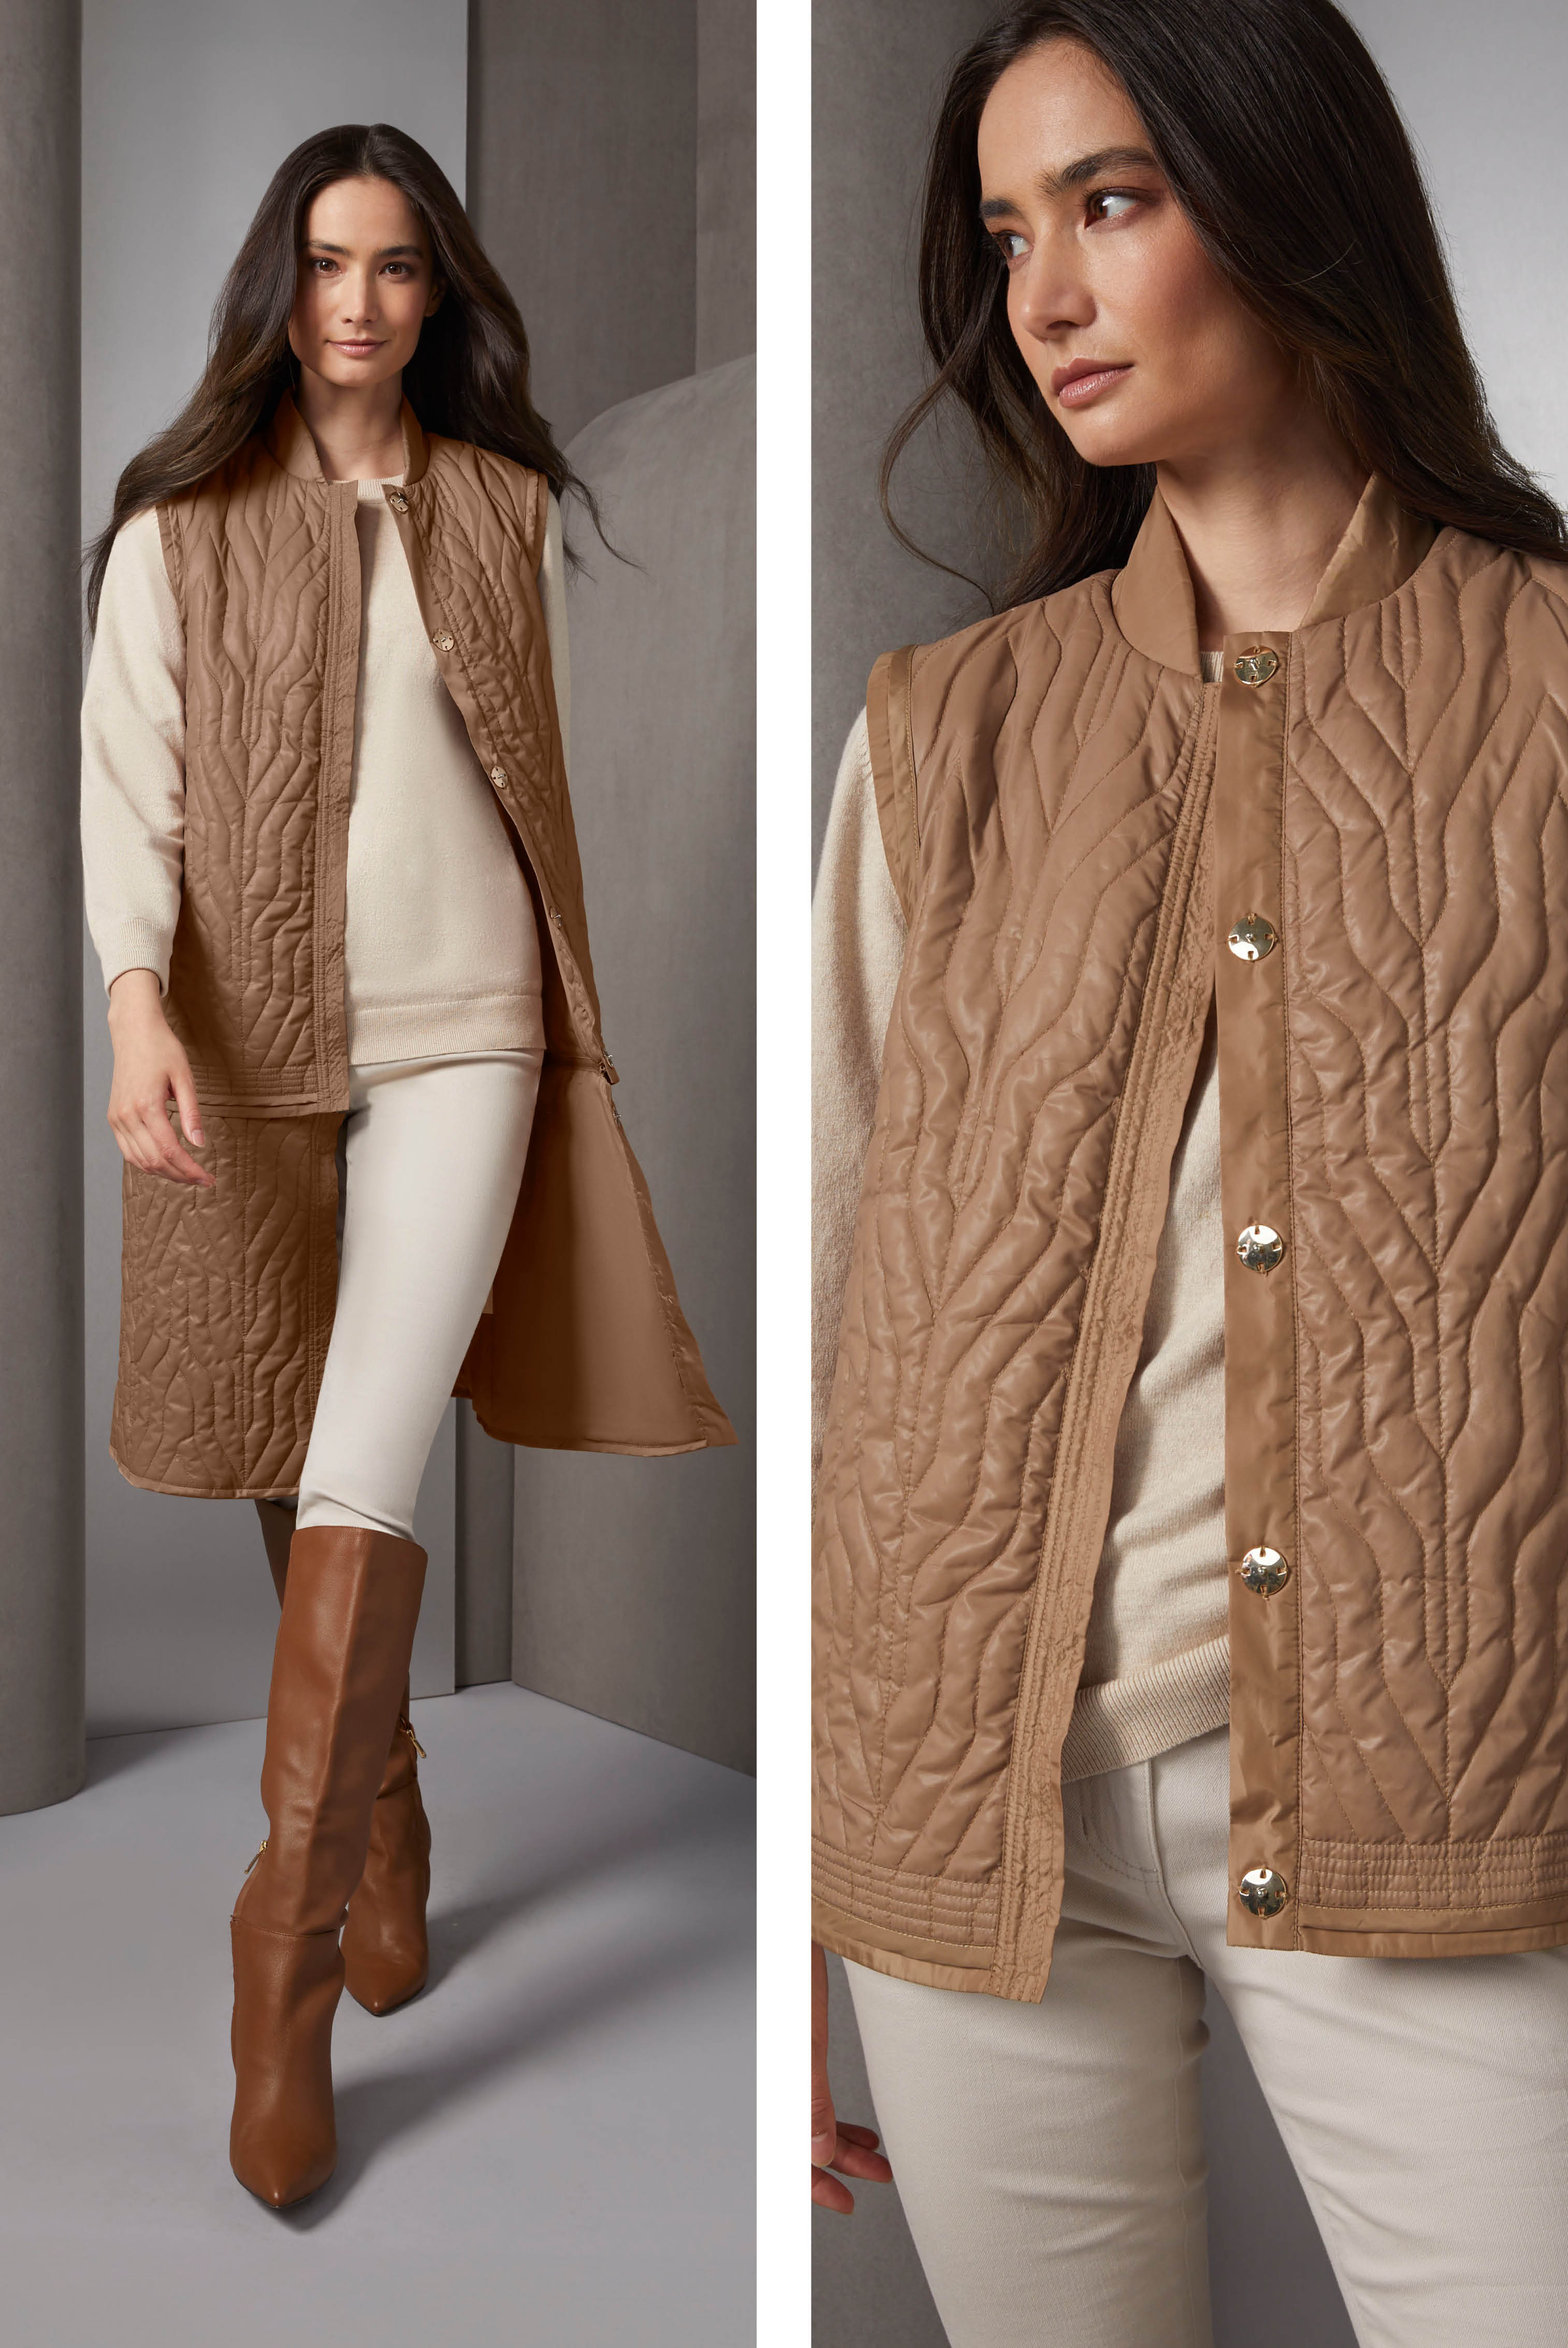 Puffers form the core of ski resort chic. This spire-quilt vest has posh gold metallic pocket welts and hidden snaps. The jacket can be lengthened with its zip-on bottom yoke or turned into a coat with its zip-on sleeves.